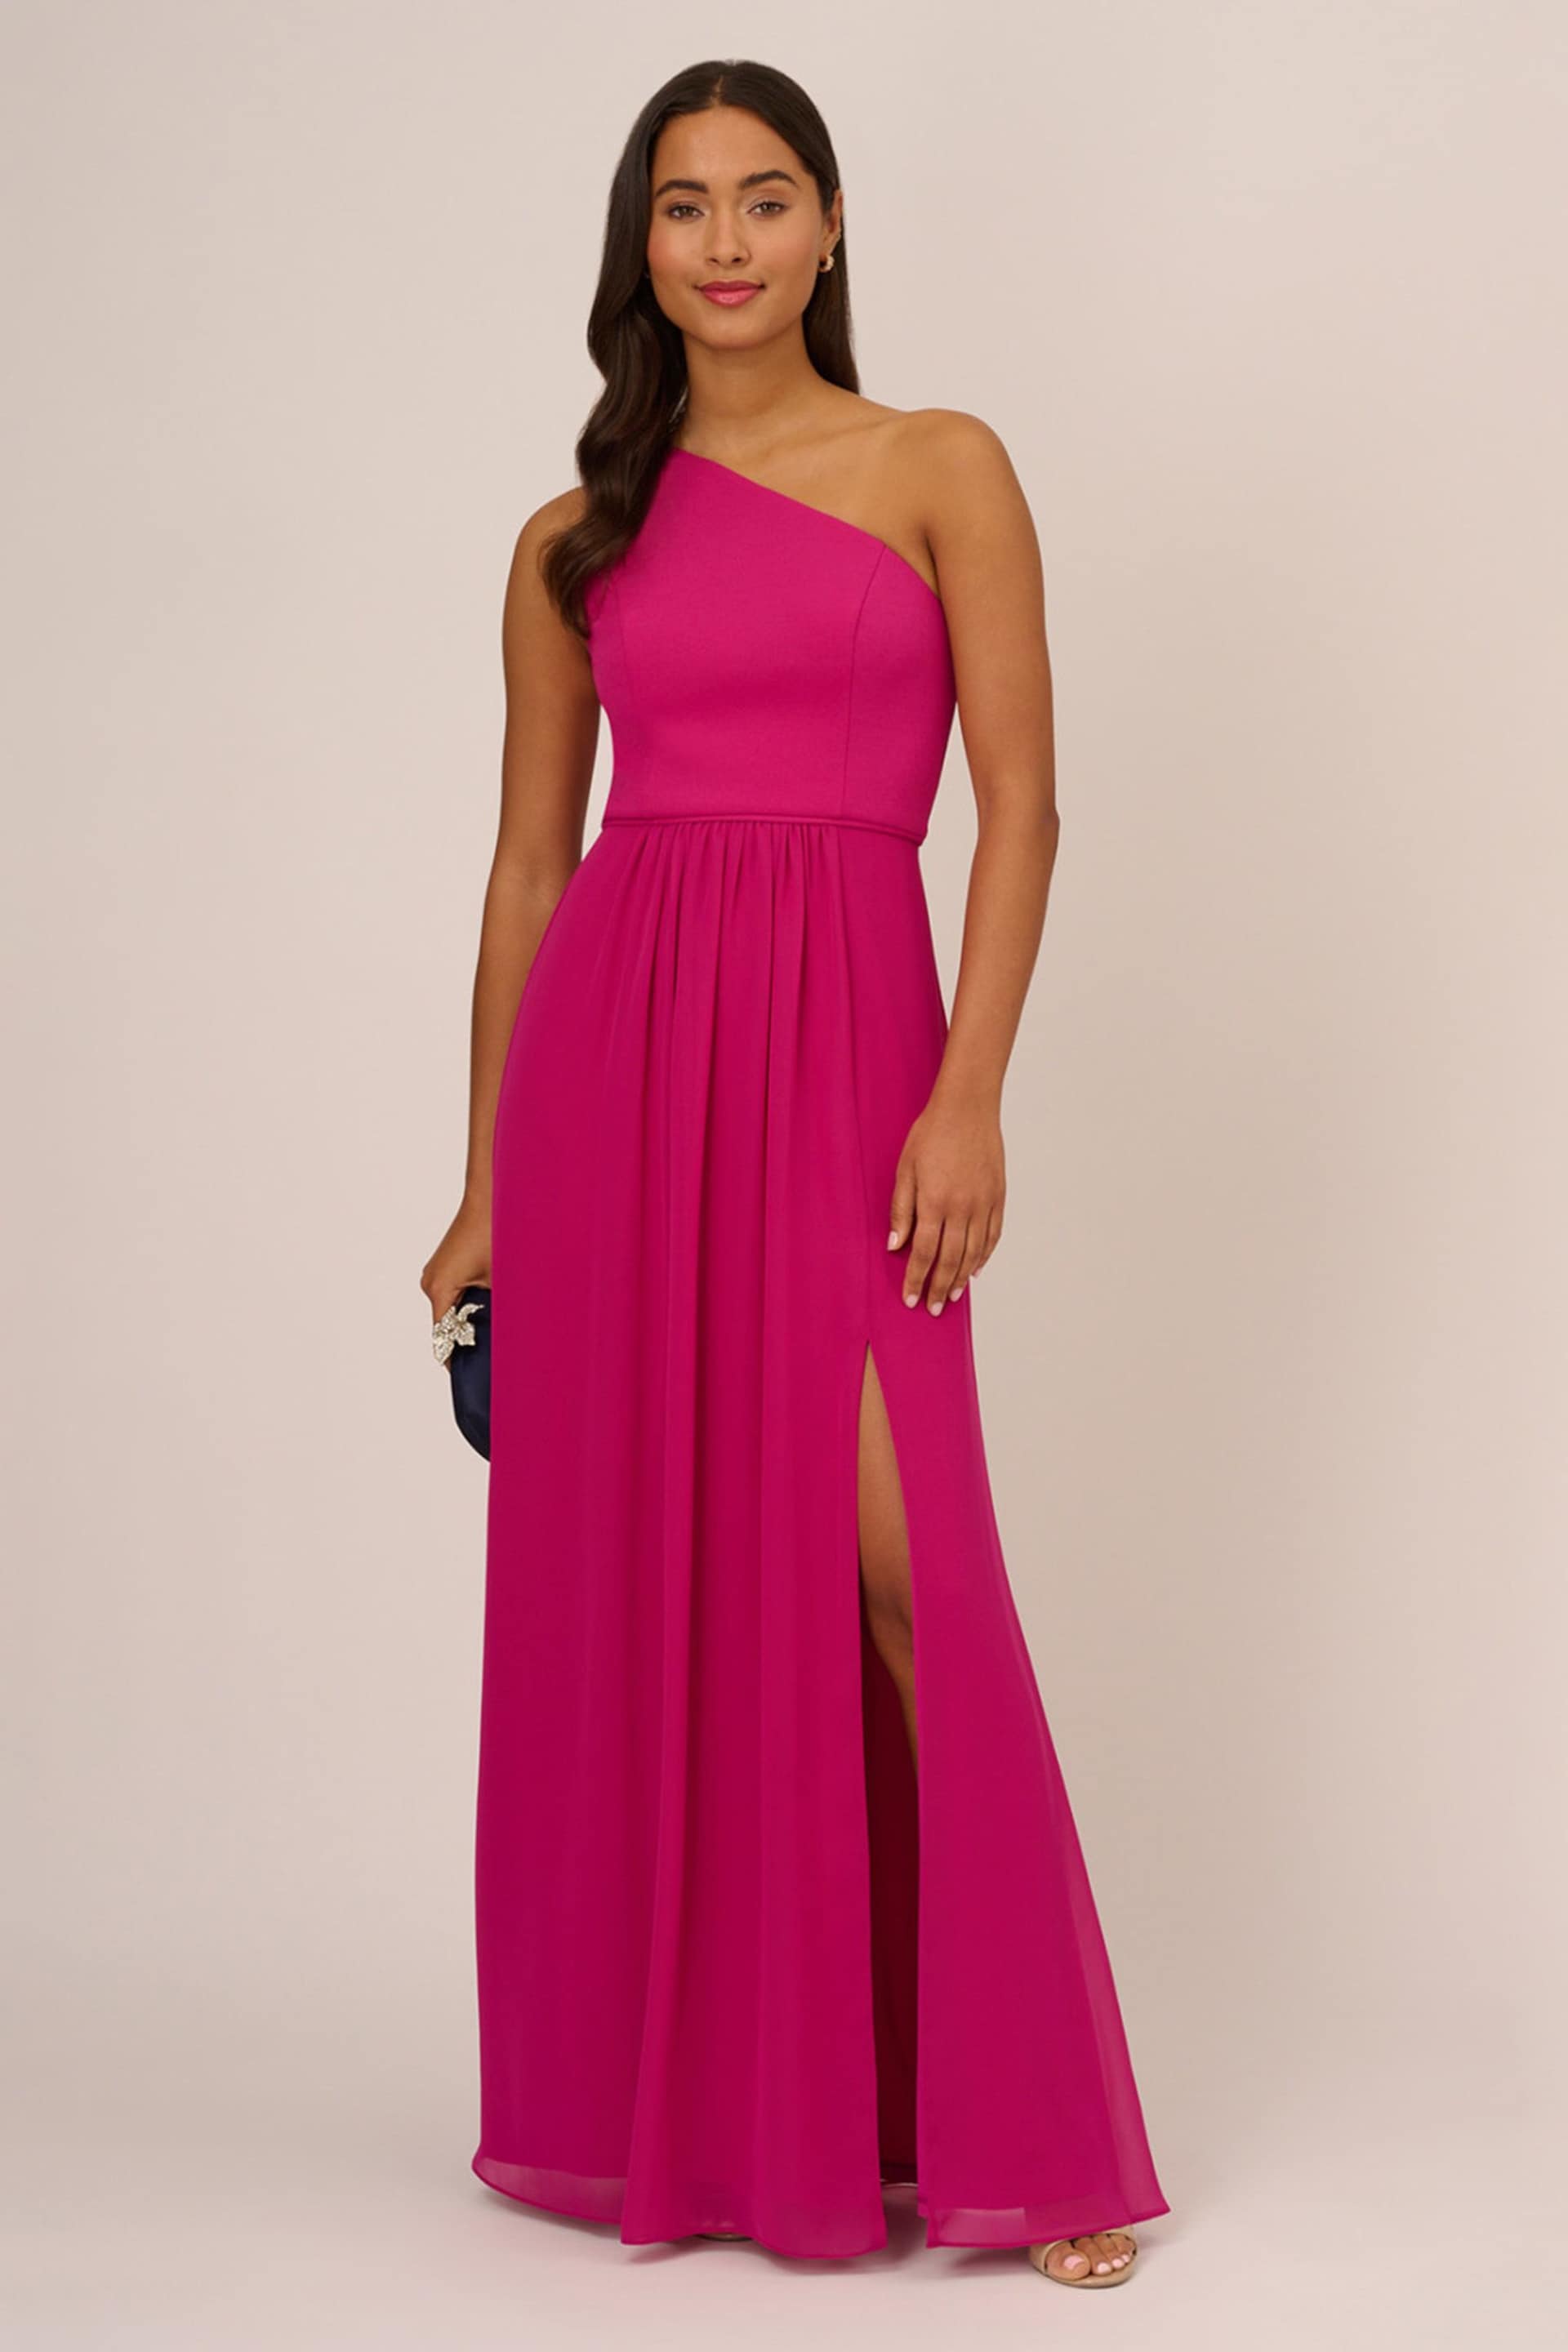 Adrianna Papell One Shoulder Chiffon Gown - Image 3 of 7